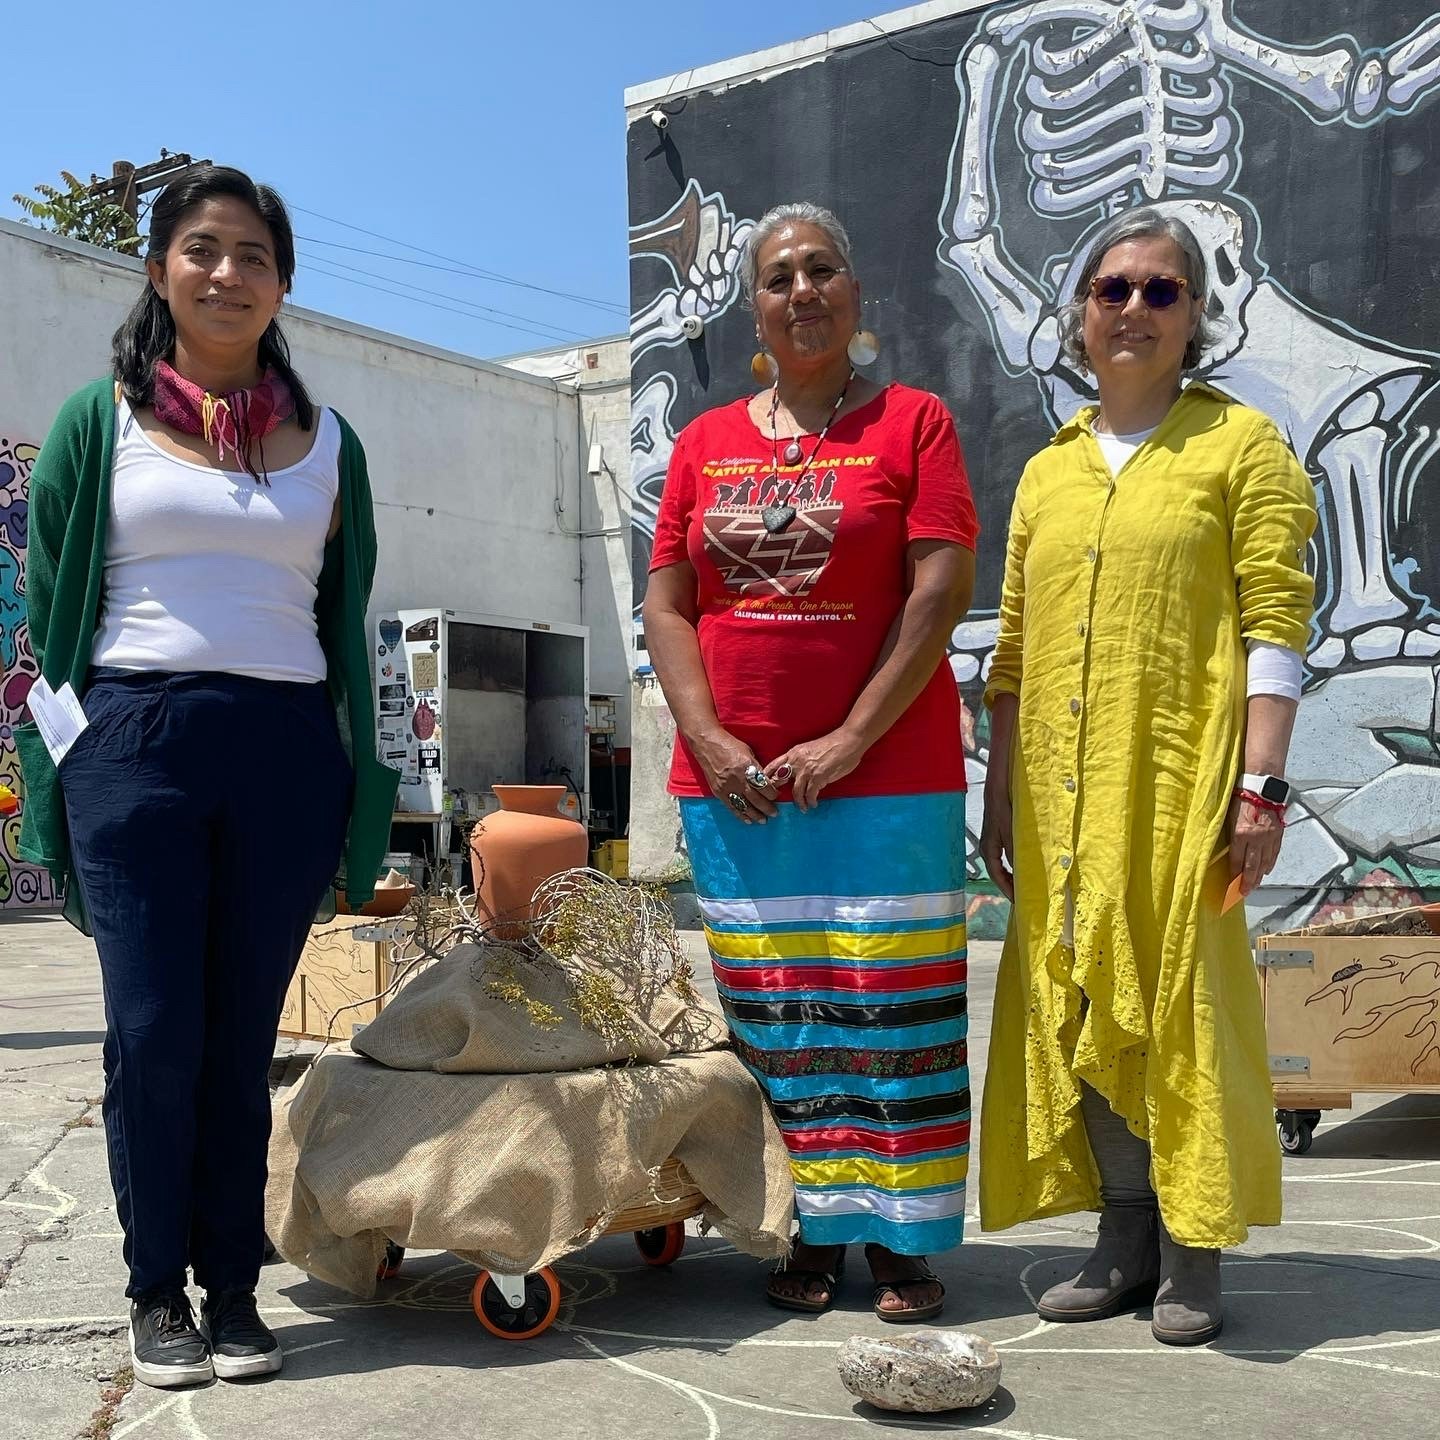 PST 2024 Sinks: Places We Call Home Artist and Scientist, Maru Garcia, Tongva and Chumash Land Steward, Tina Calderon and Artist, Beatriz Jaramillo take a moment to honor the commencement of the research of local contaminated land; through an intimate ceremony at Self Help Graphics & Art (May 2022). Photograph by Jennifer Cuevas. Courtesy of Self Help Graphics & Art. ©Self Help Graphics & Art.